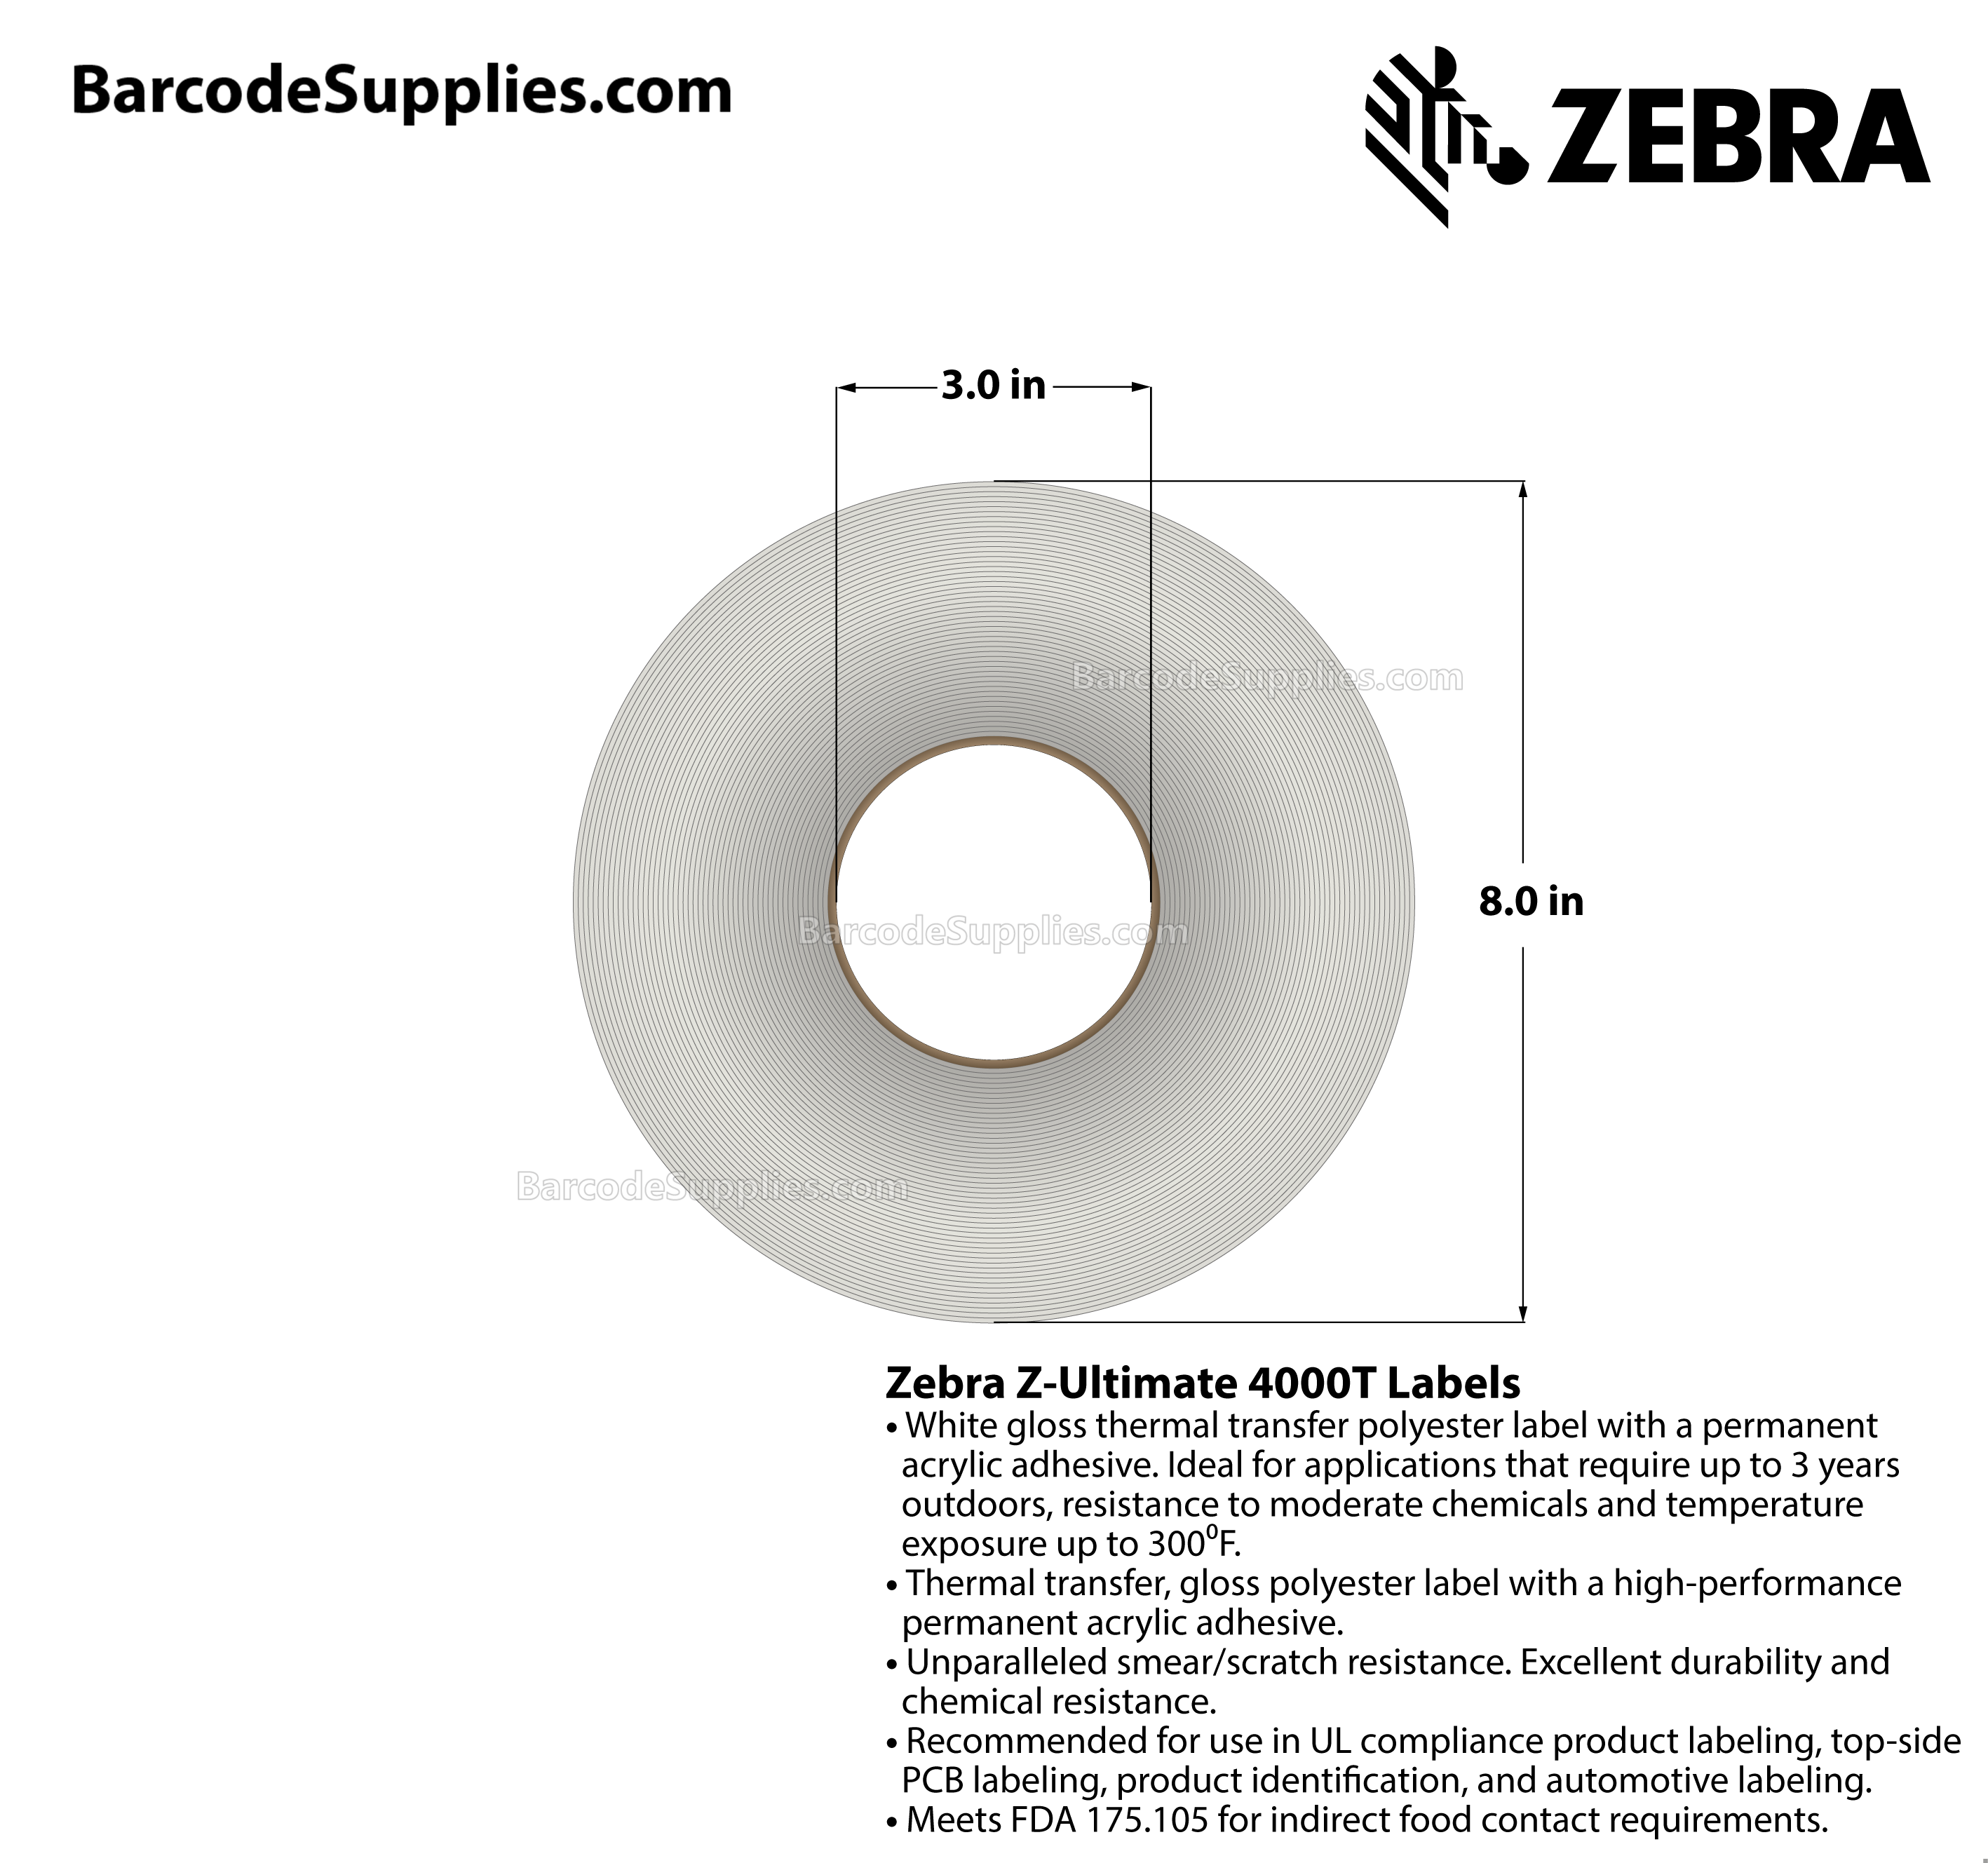 3 x 3 Thermal Transfer White Z-Ultimate 4000T Labels With Permanent Adhesive - Perforated - 1880 Labels Per Roll - Carton Of 4 Rolls - 7520 Labels Total - MPN: 10011710